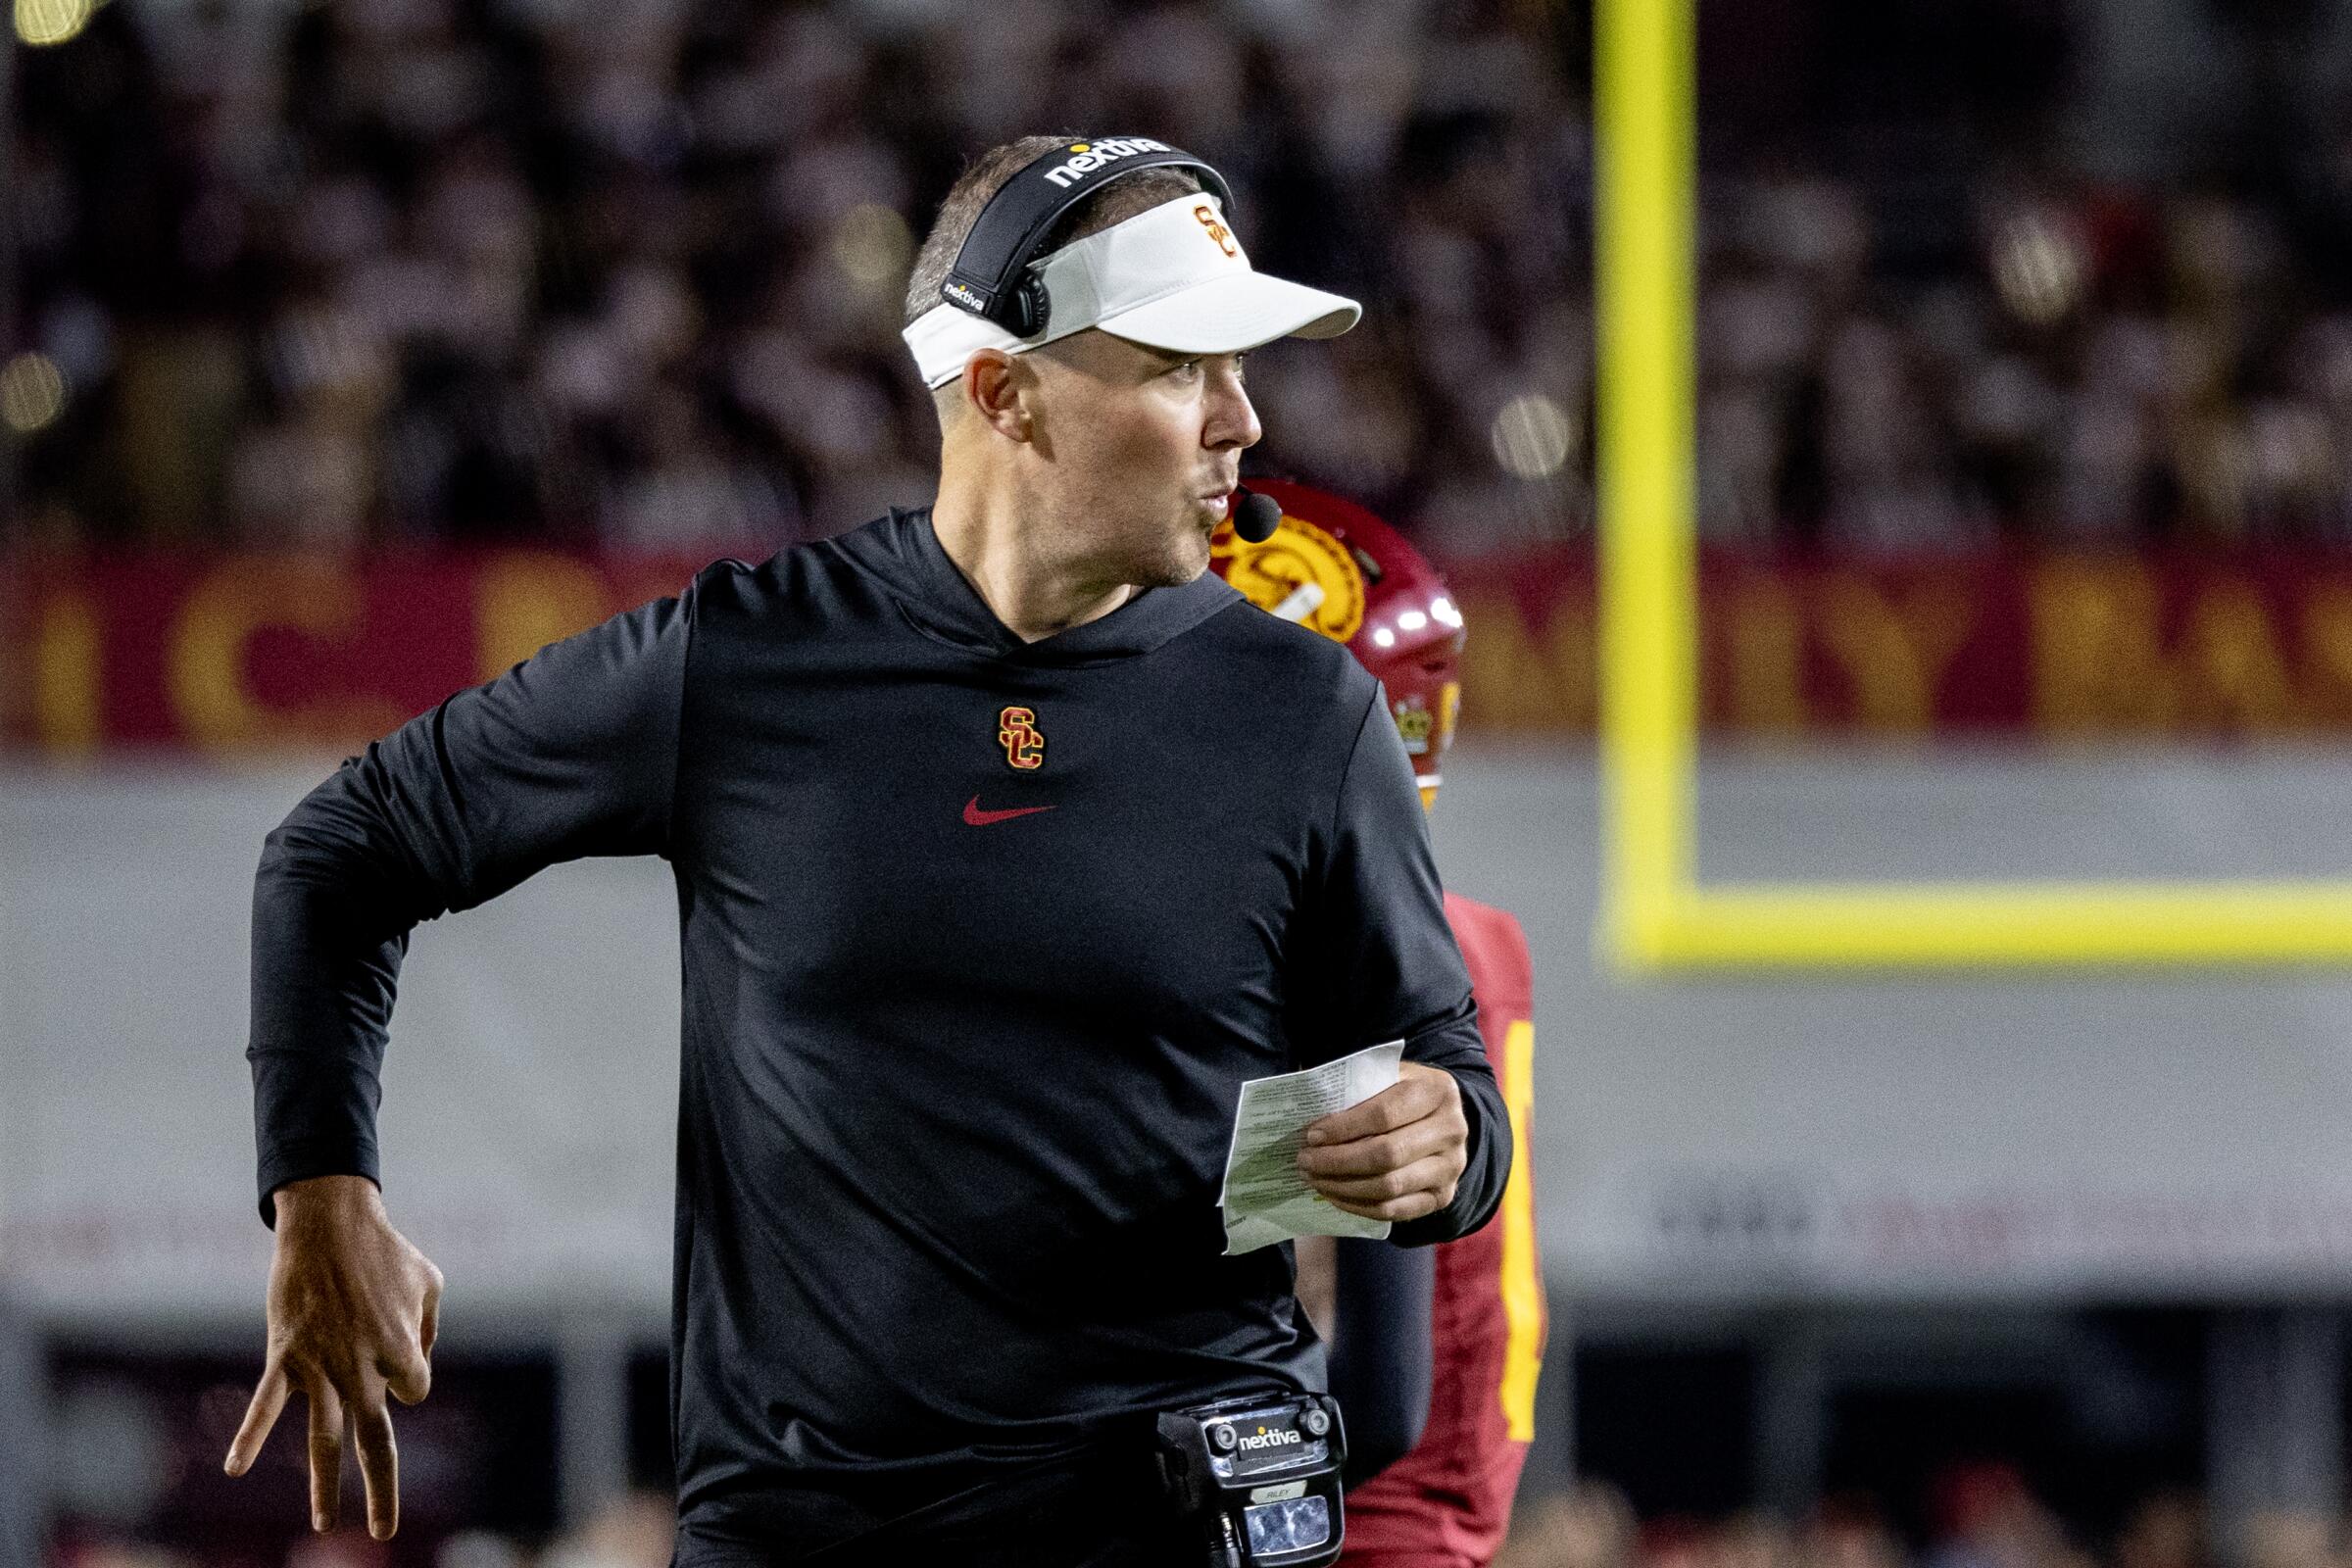 USC coach Lincoln Riley calls a play from the sideline during a win over Arizona on Oct. 7.